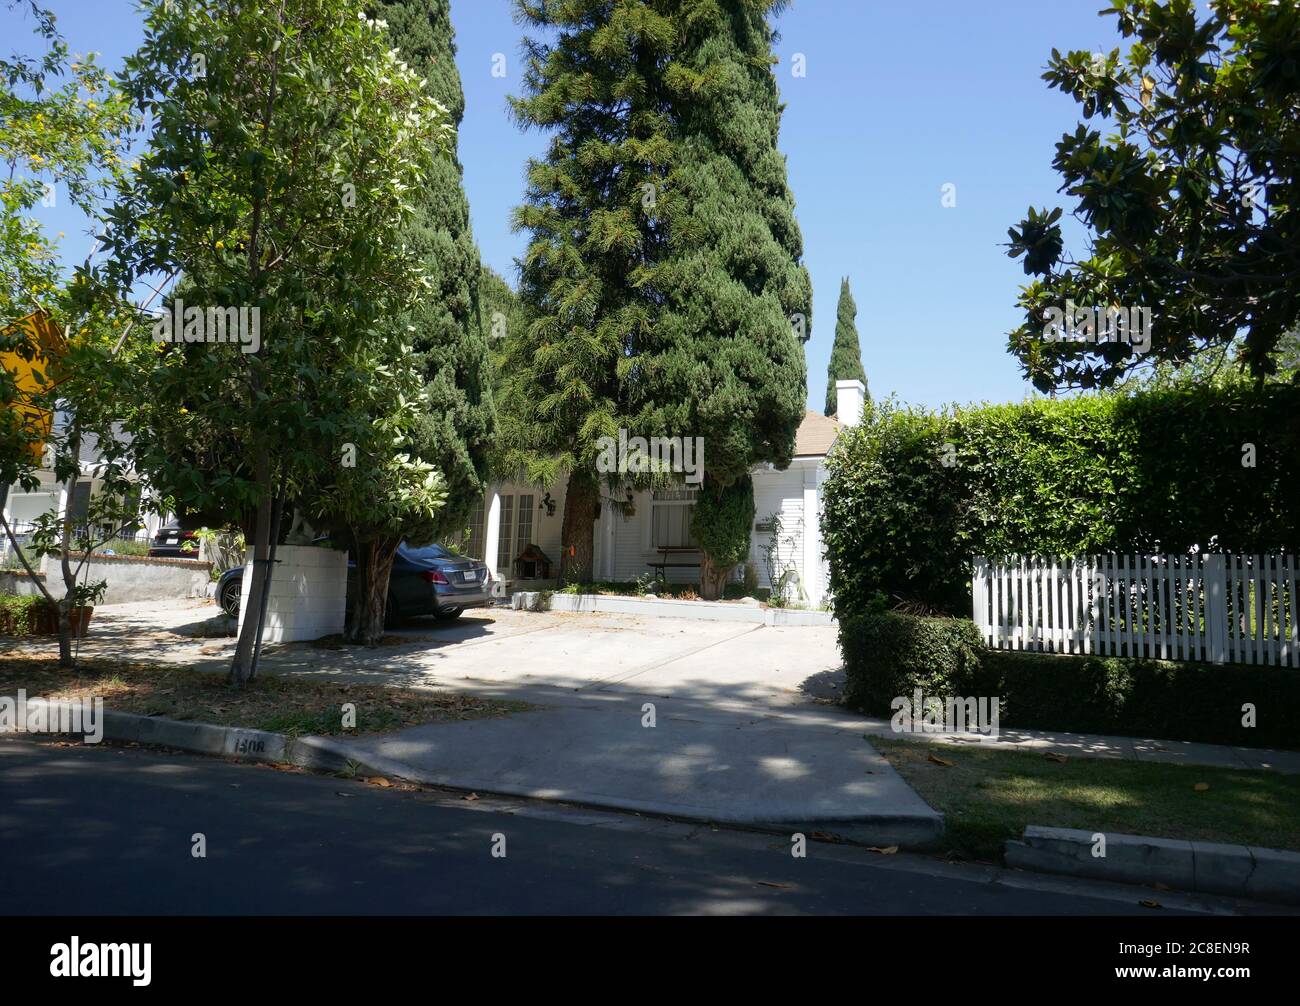 Los Angeles, California, USA 23rd July 2020 A general view of atmosphere of Charlie Chaplin Jr.'s Home, his last residence where he died, on July 23, 2020 at 1408 N. Ogden Drive in Los Angeles, California, USA. Photo by Barry King/Alamy Stock Photo Stock Photo